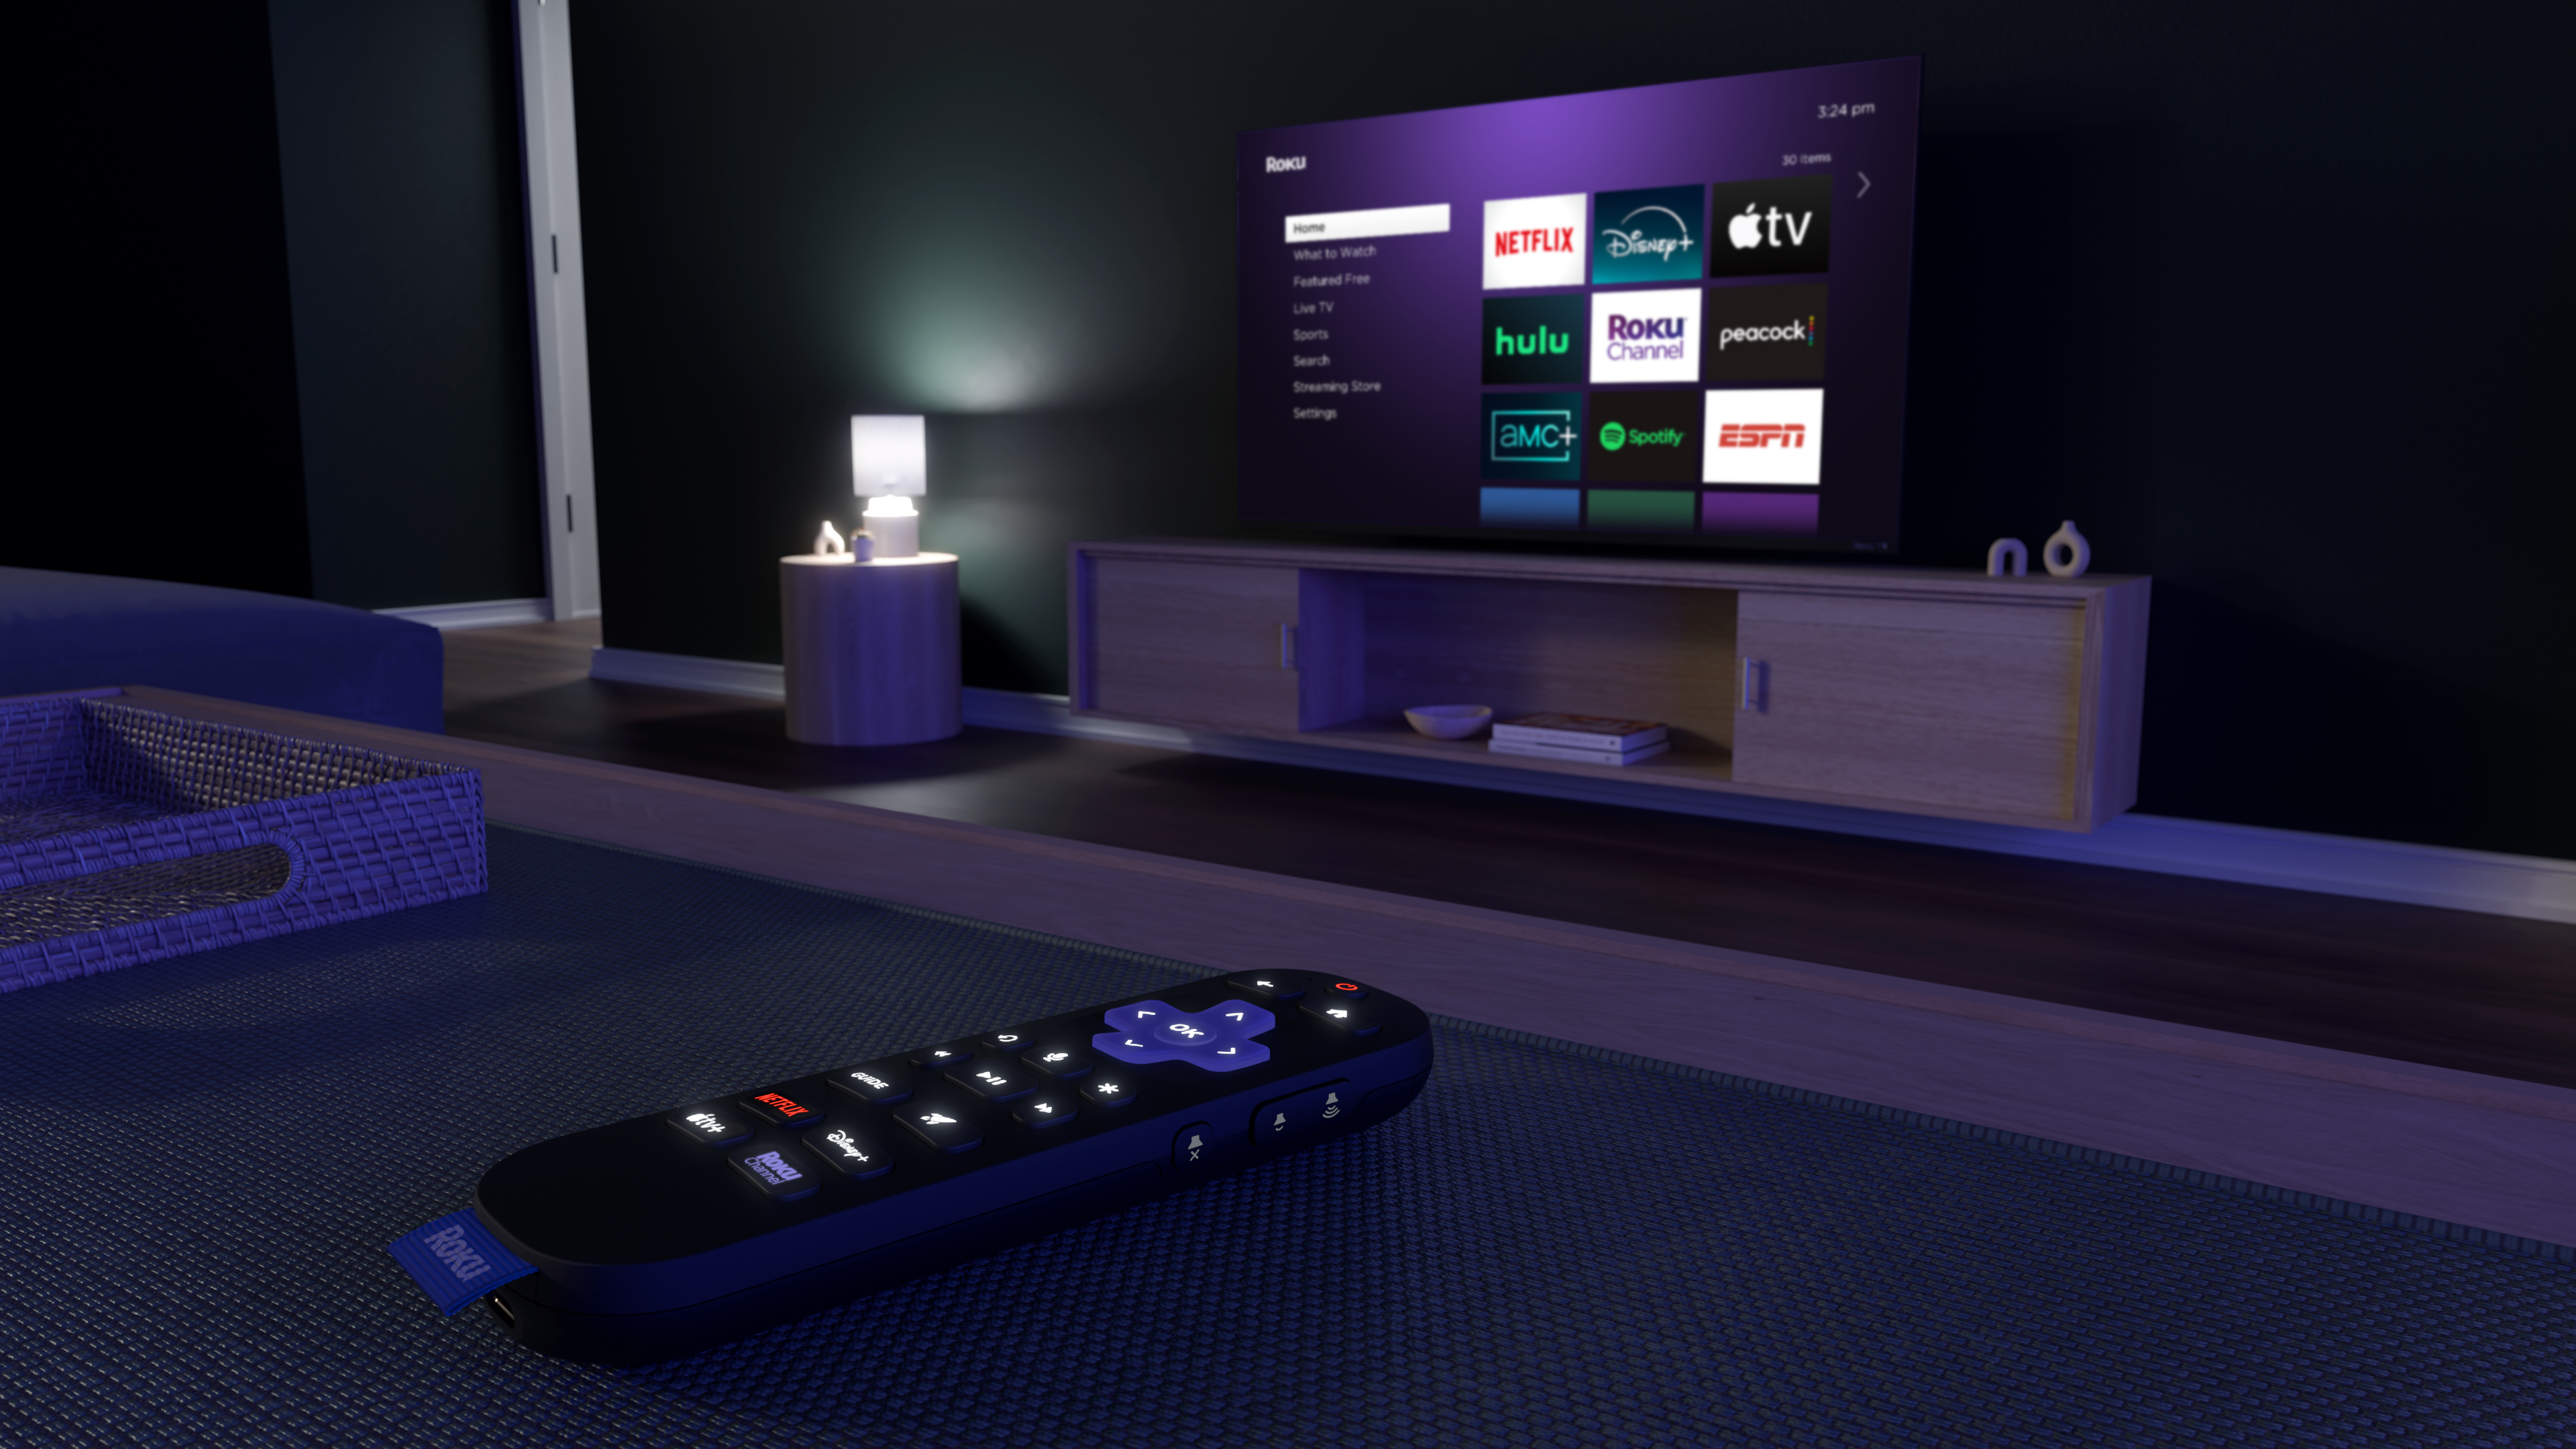 Roku Announces a New Roku Pro Remote 2 with Backlit Buttons, USB-C, & New Buttons